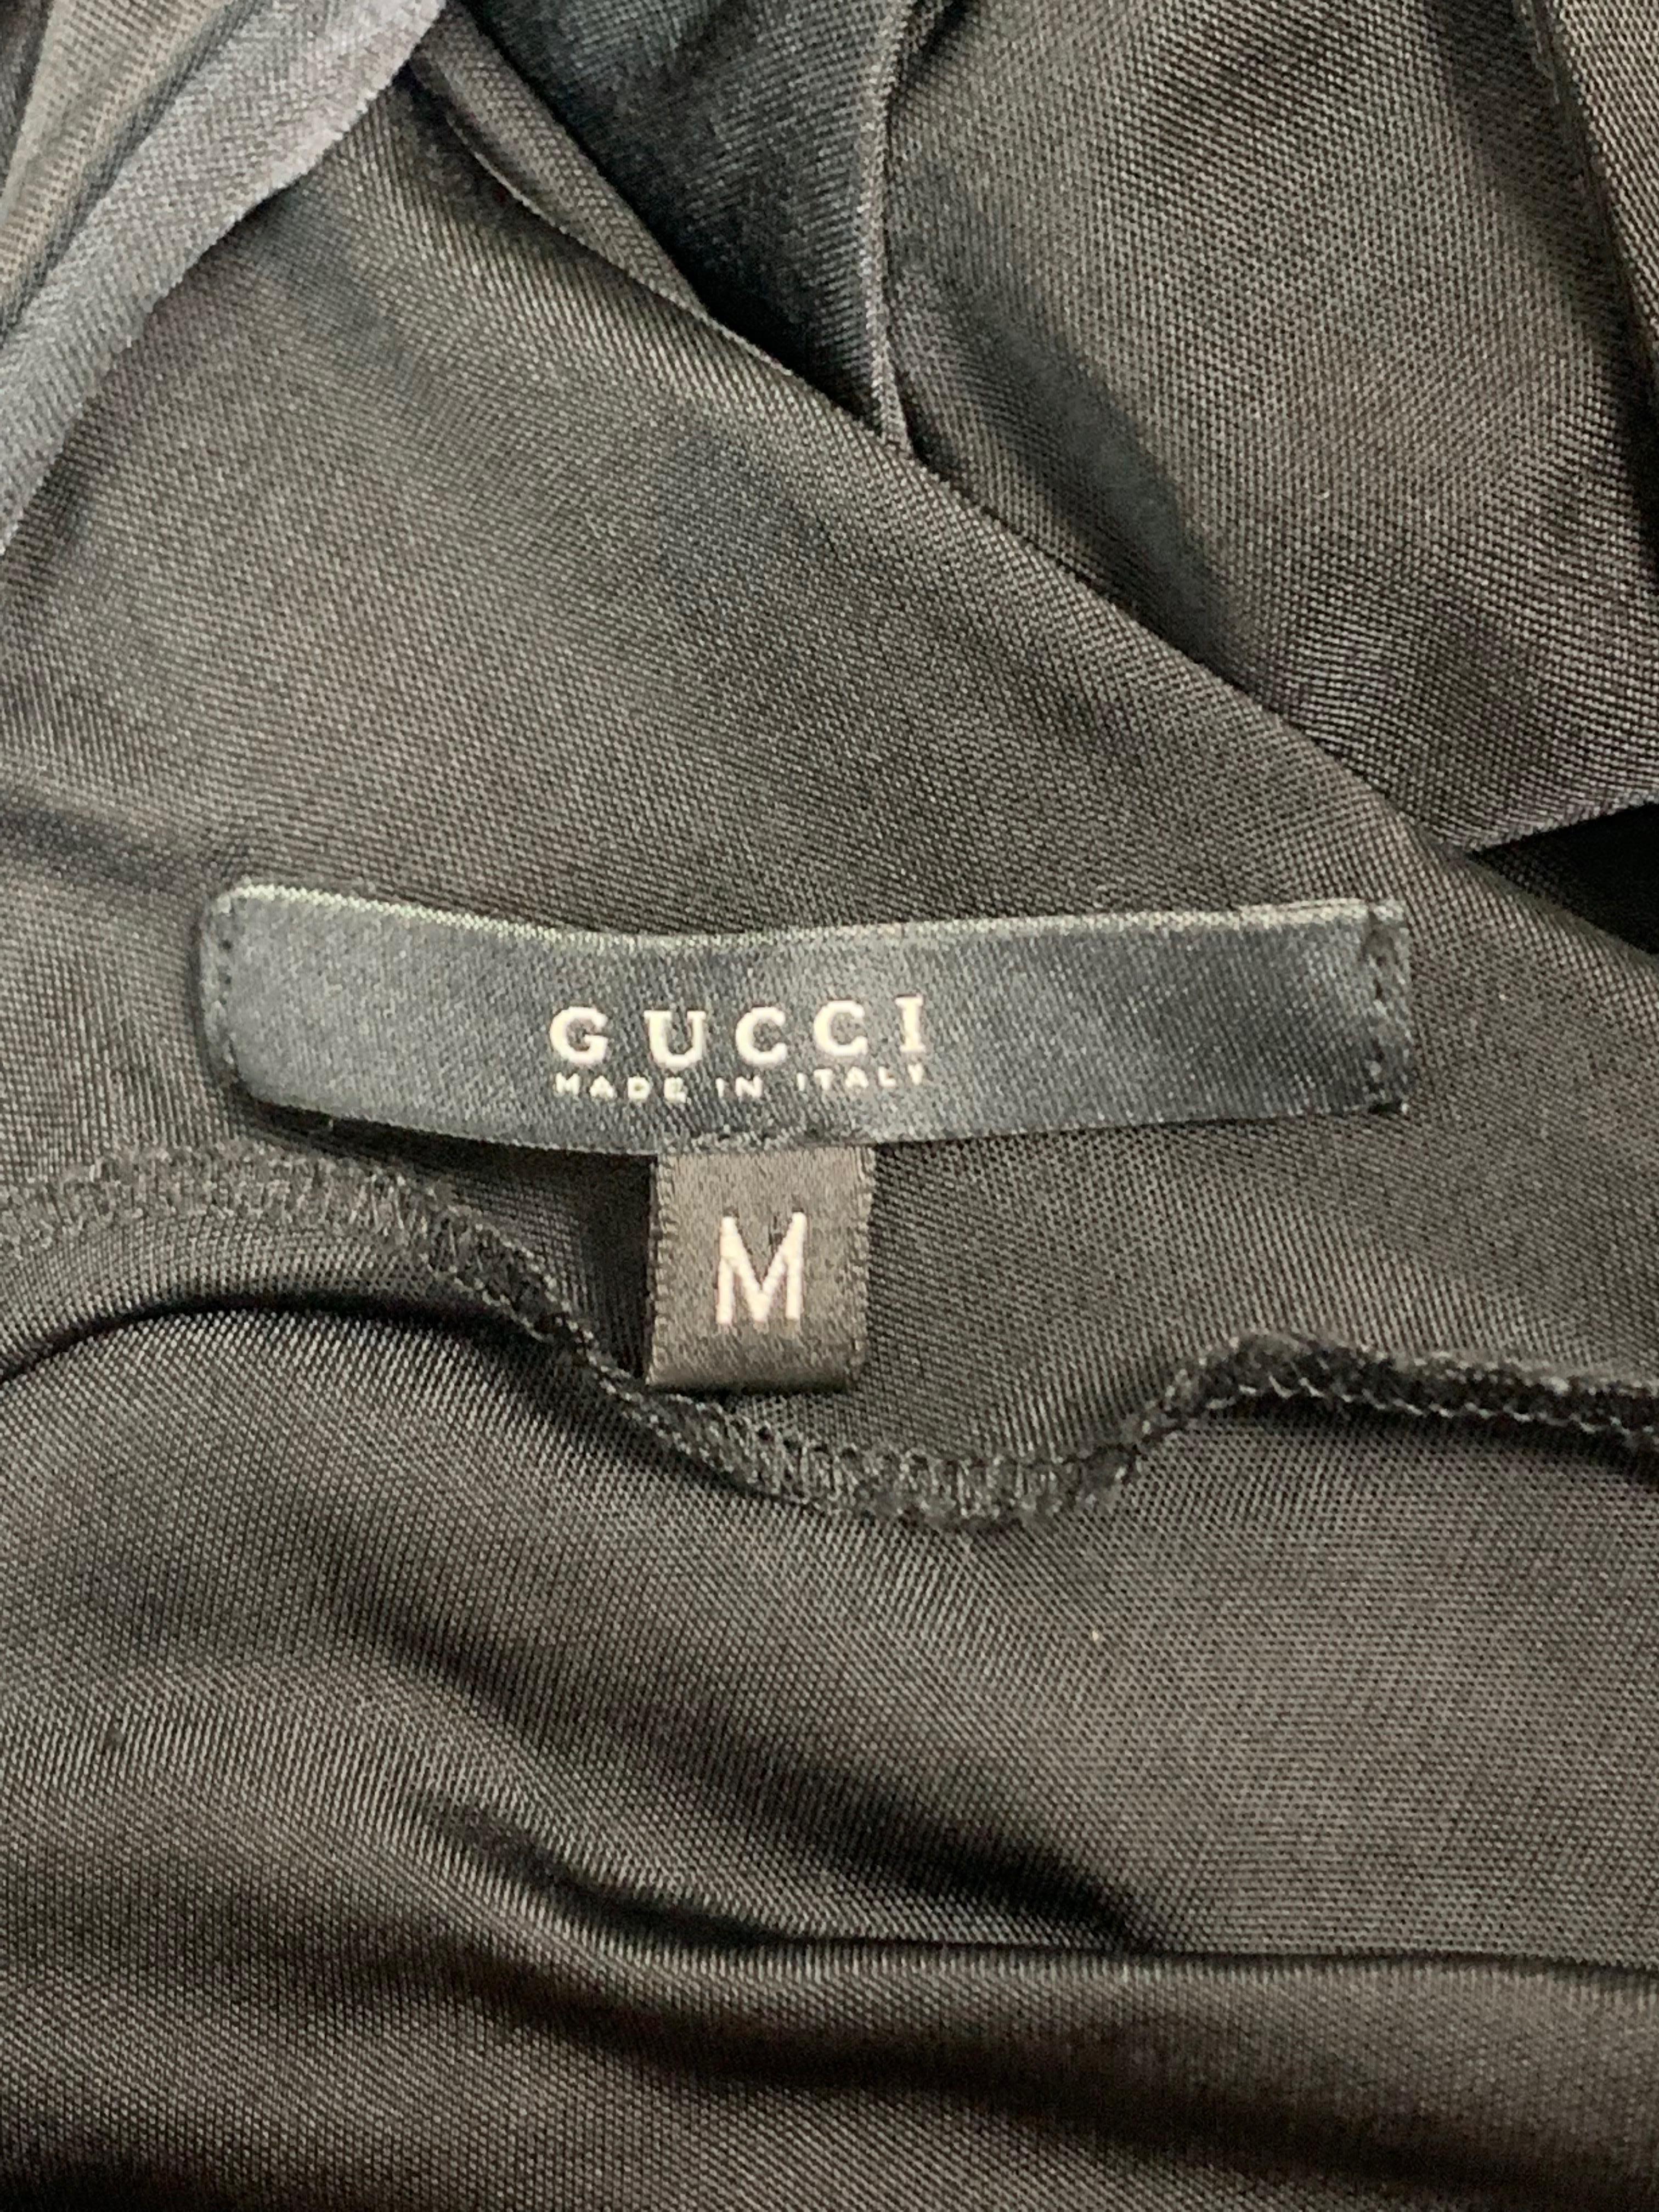 S/S 2005 Gucci Black L/S Cut-Out Bodycon Dress M In Good Condition In Yukon, OK